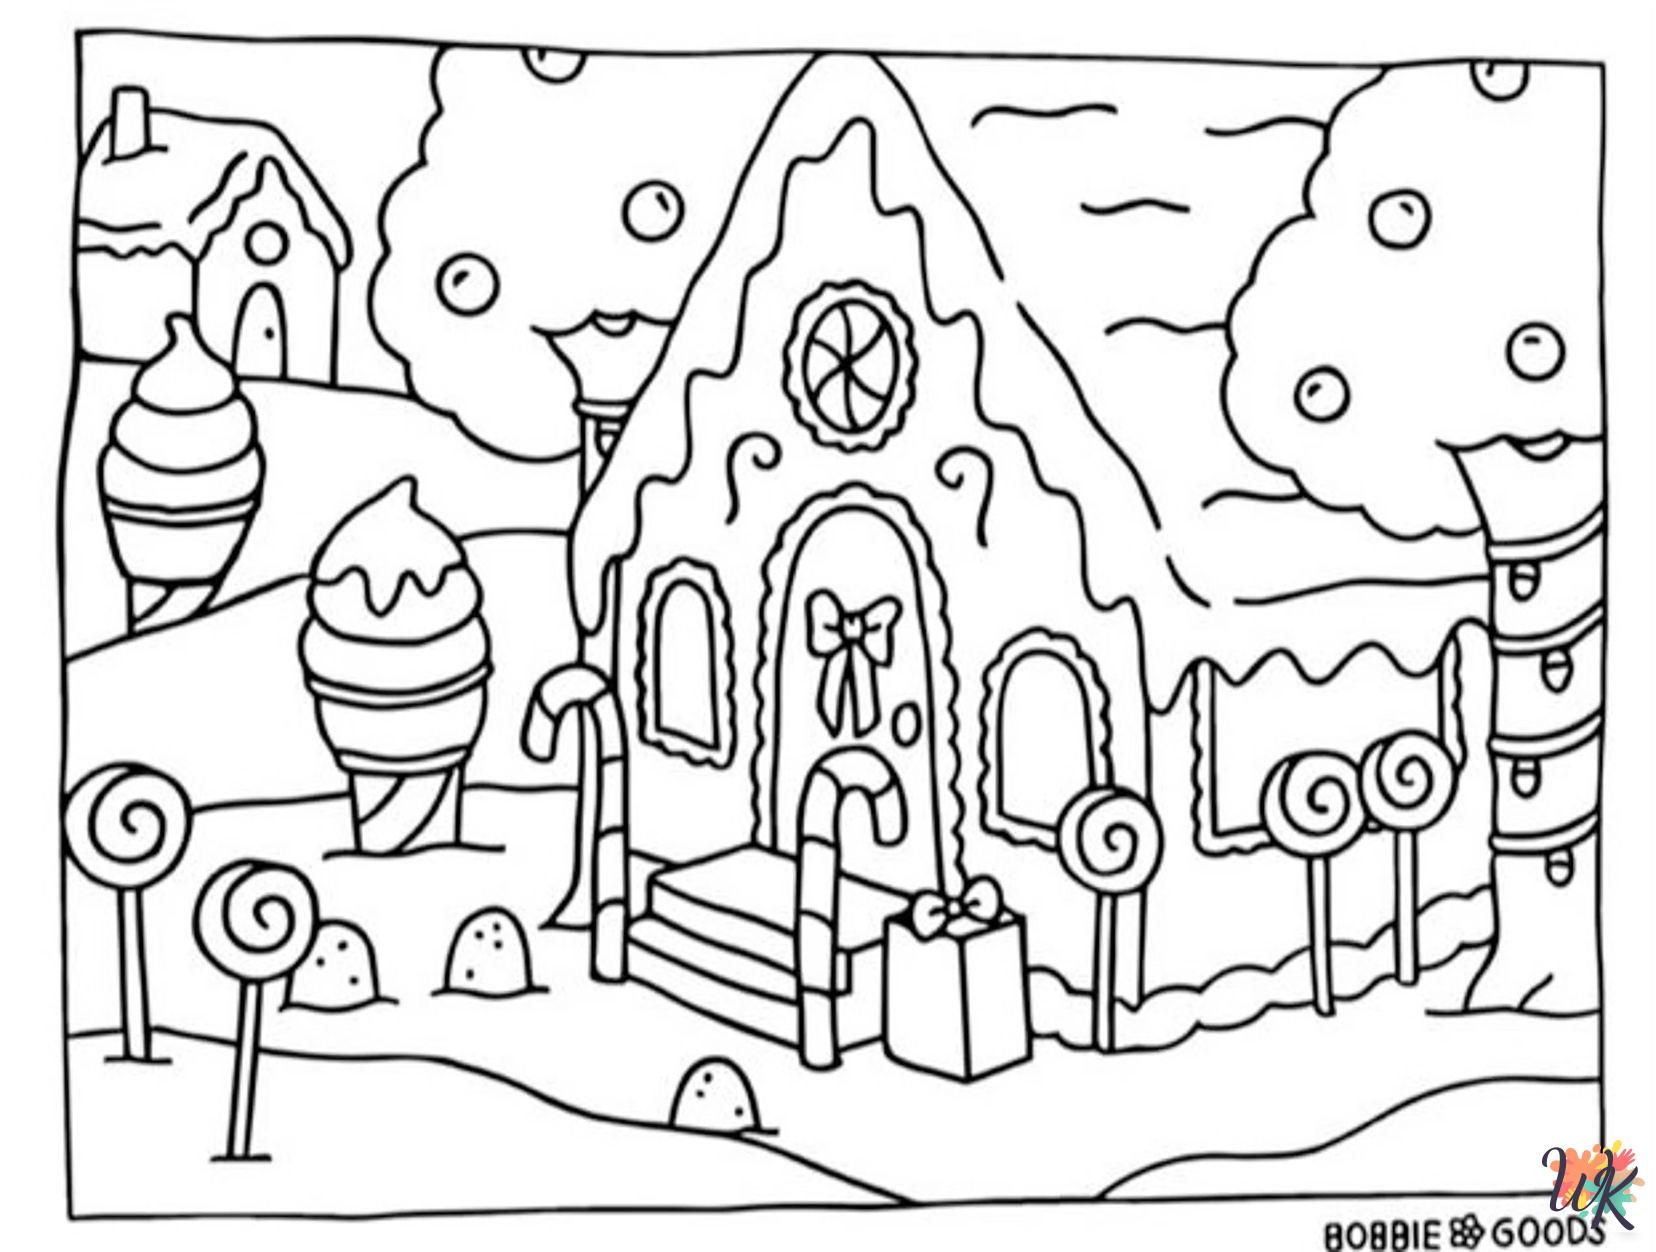 Bobbie Goods coloring pages to print